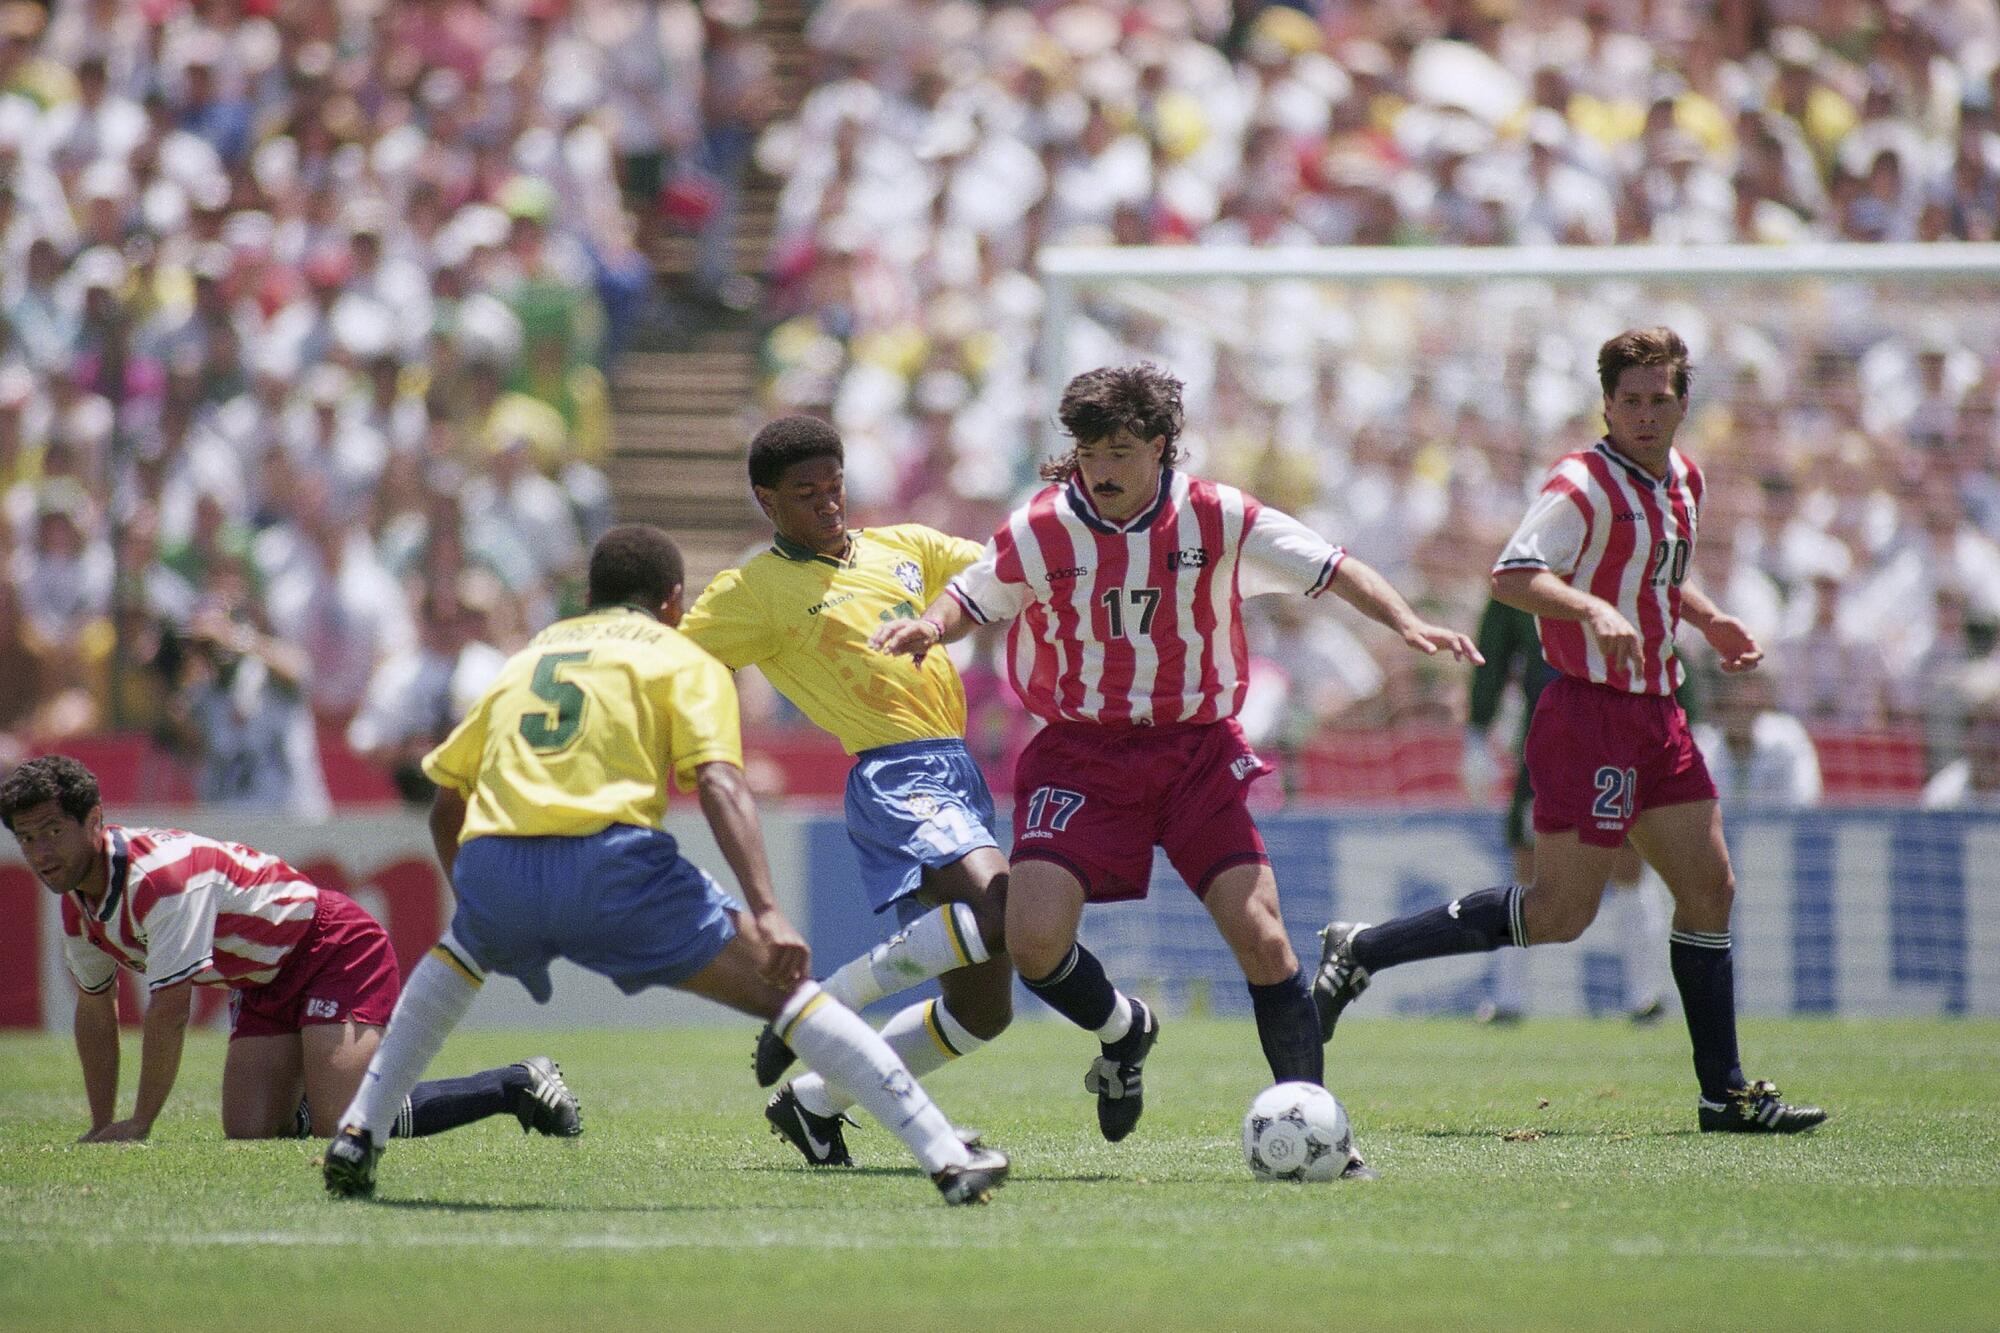 United States defender Marcelo Balboa, right, duels for the ball with Brazilians Mazinho (17).